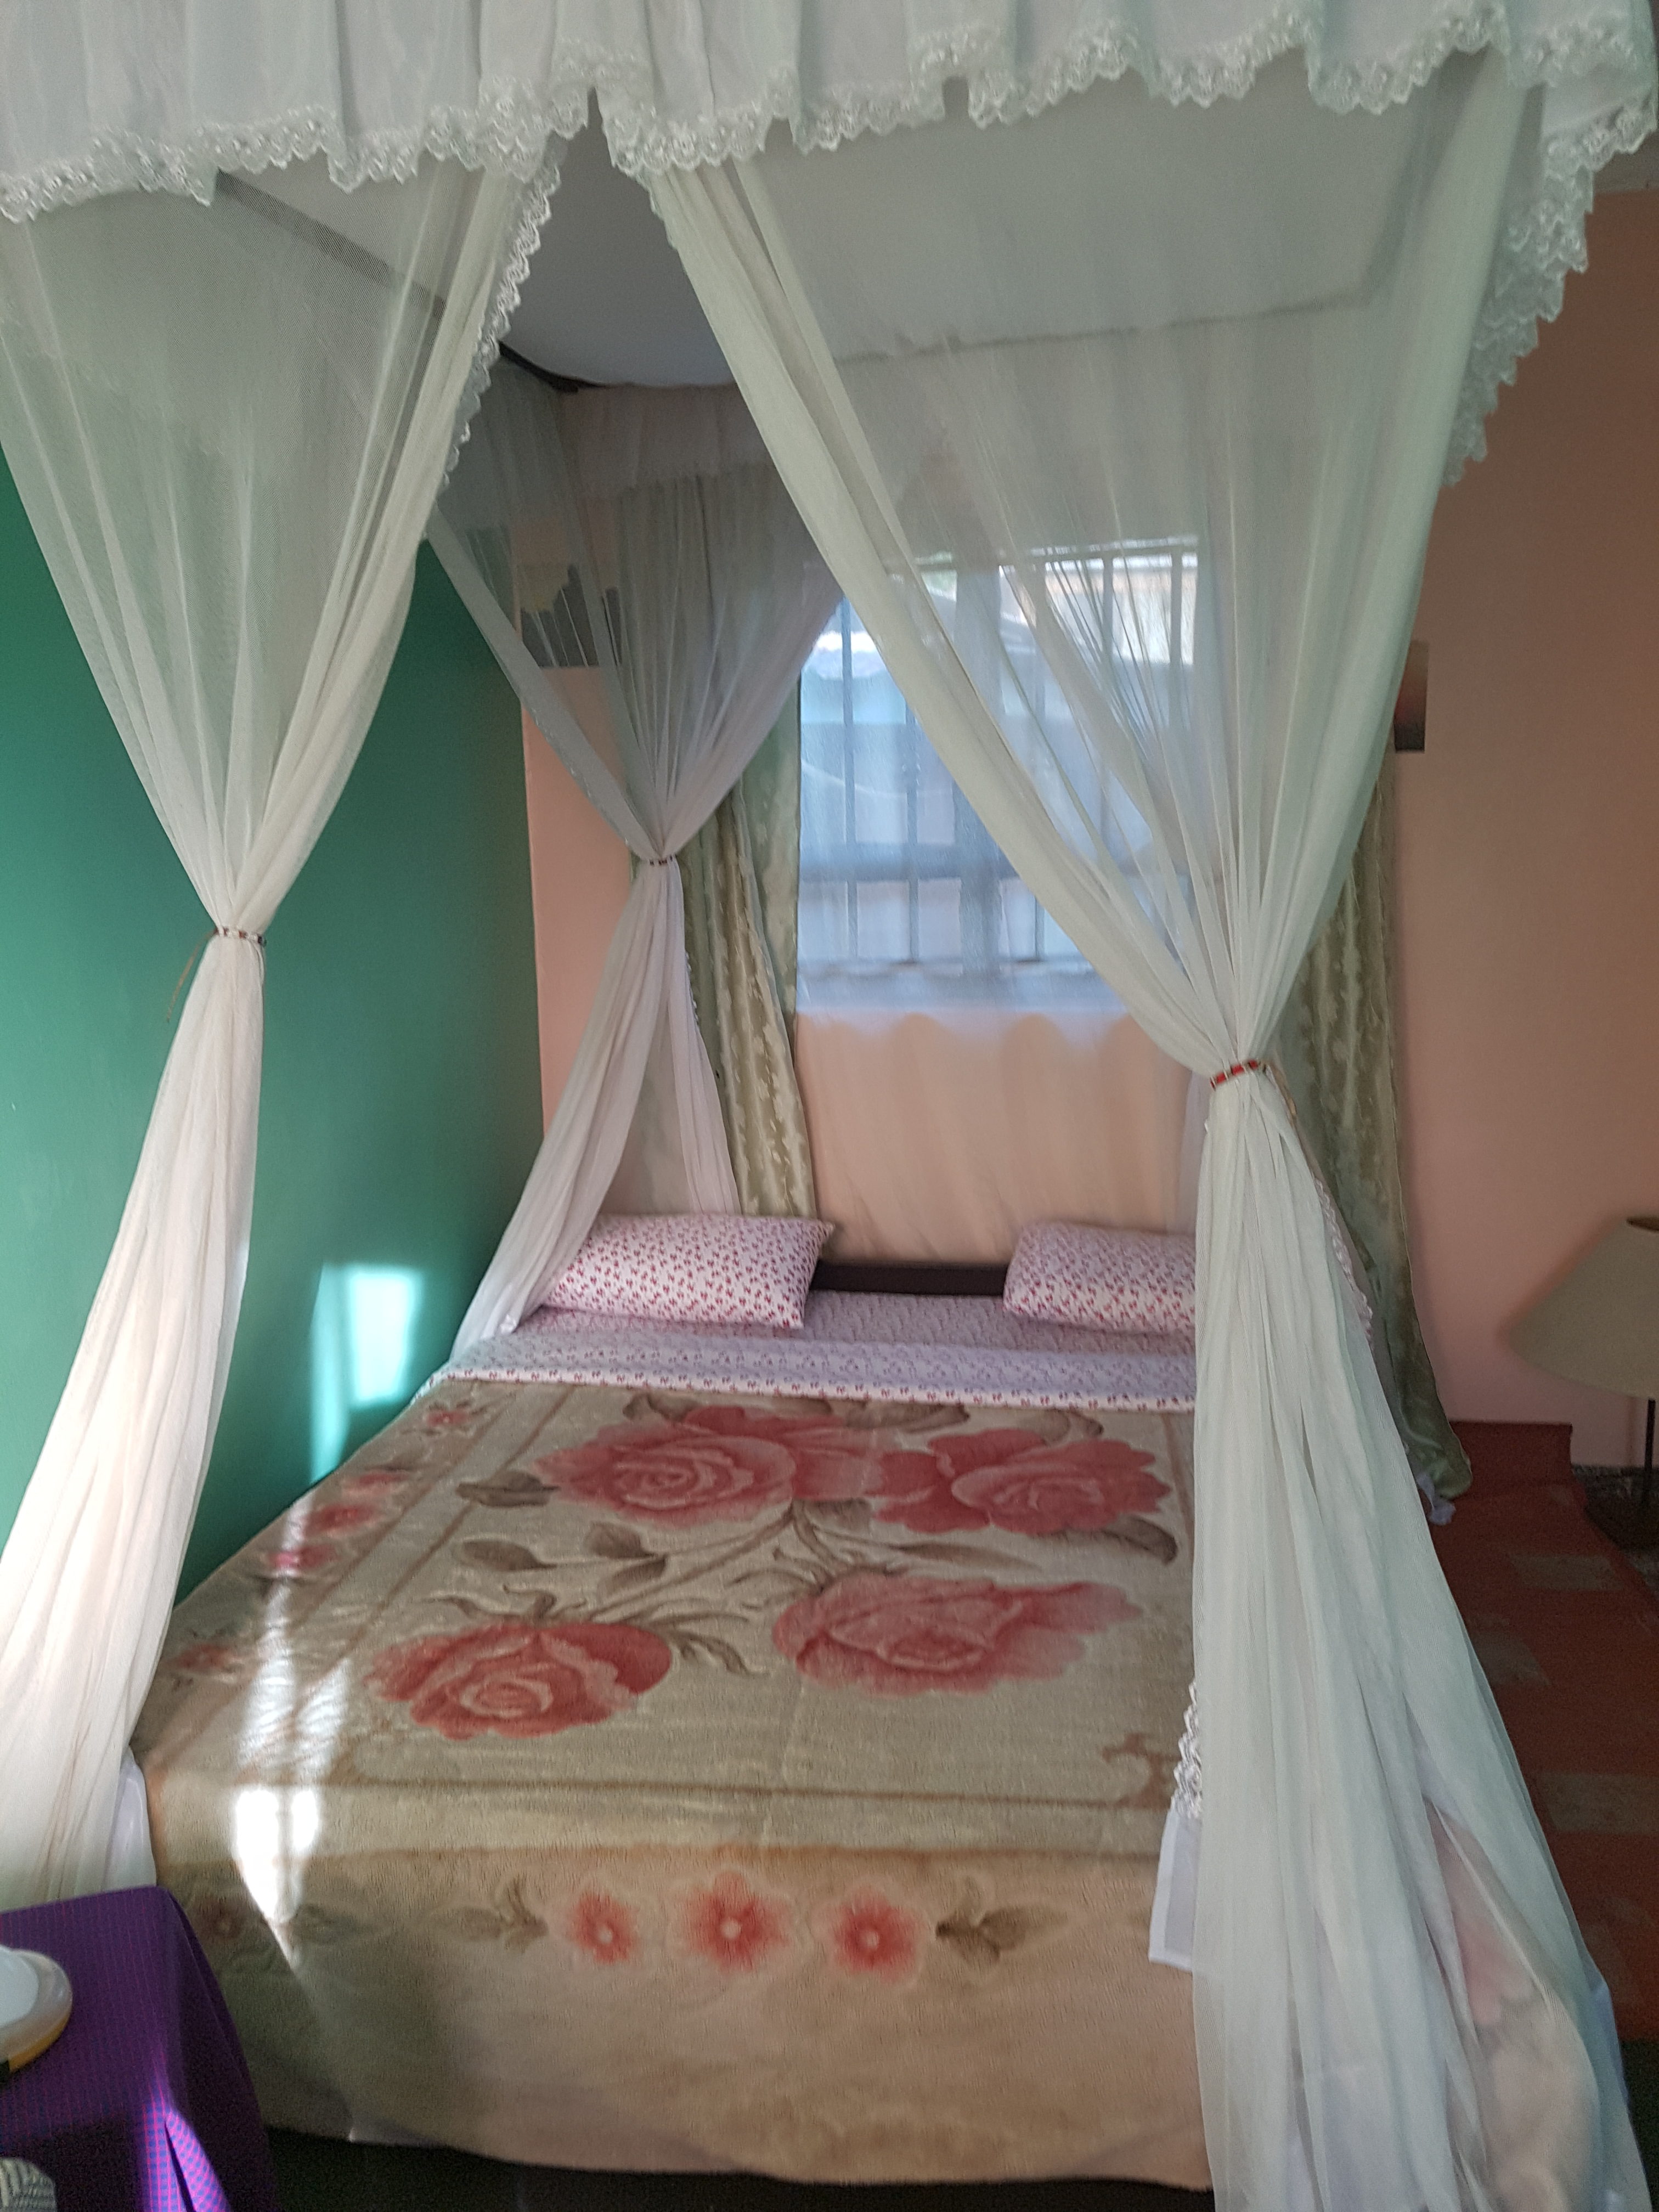 Our room at Massai's Airbnb